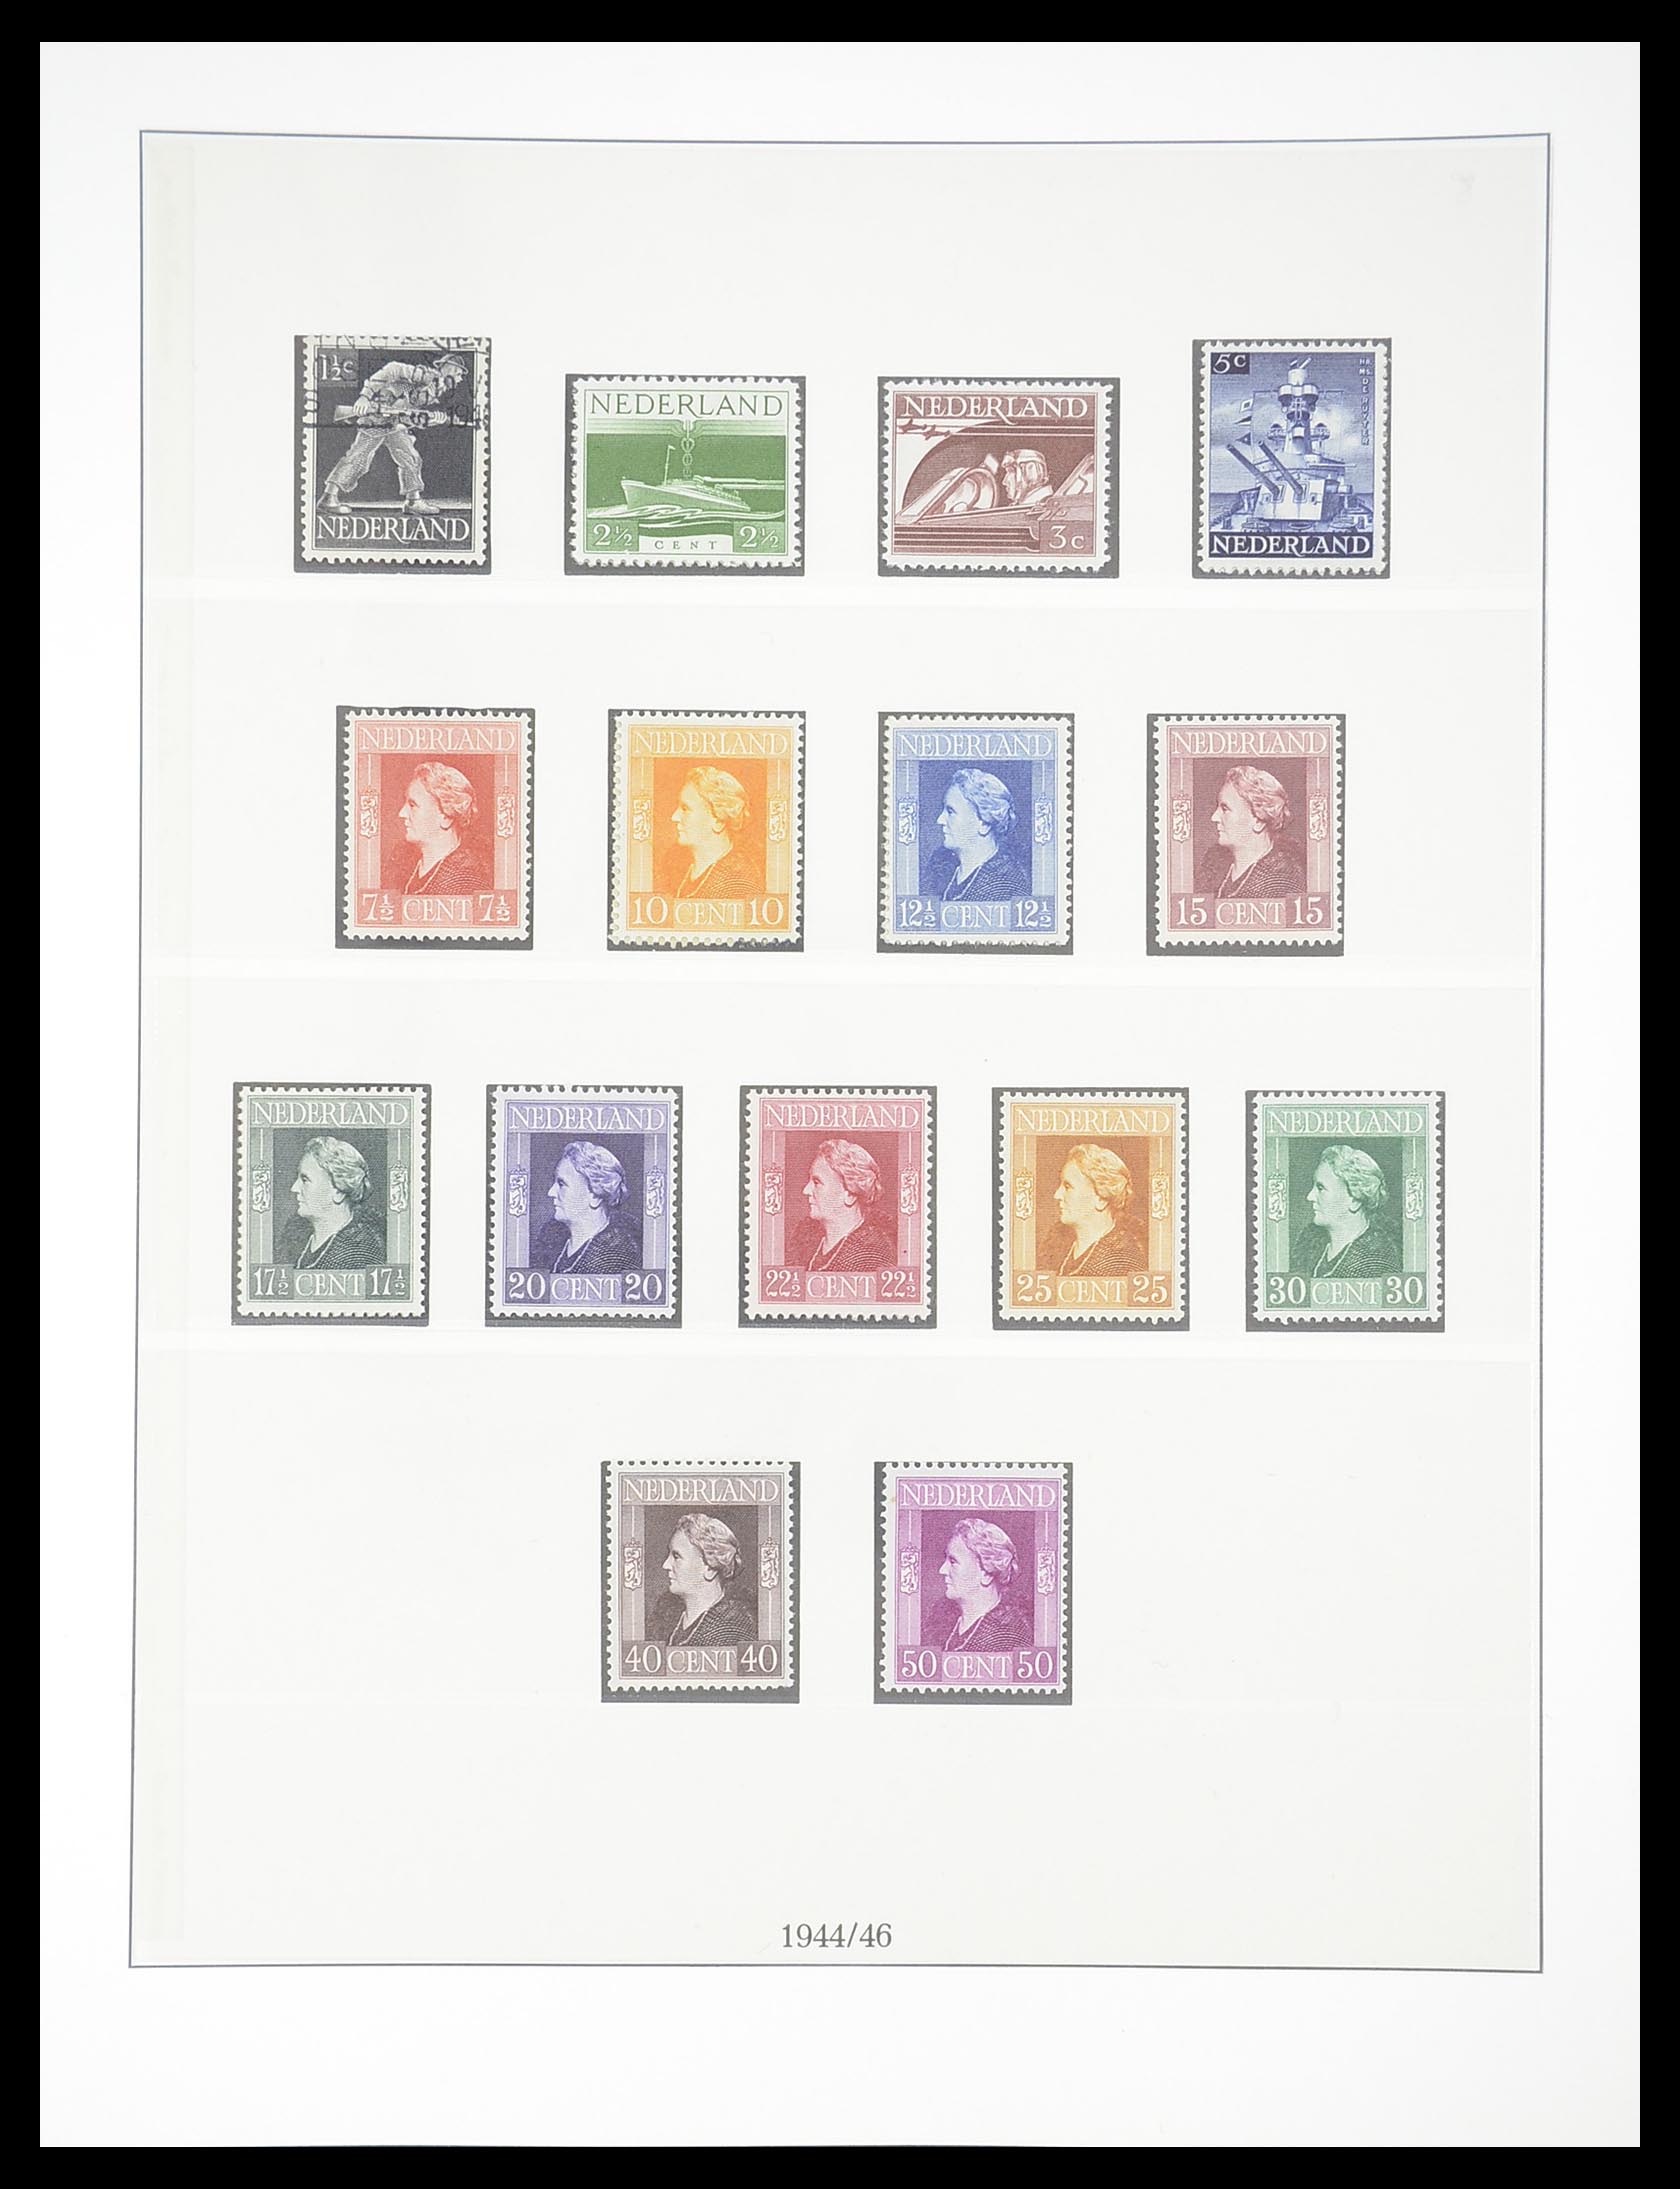 33189 037 - Stamp collection 33189 European countries 1850-1950.